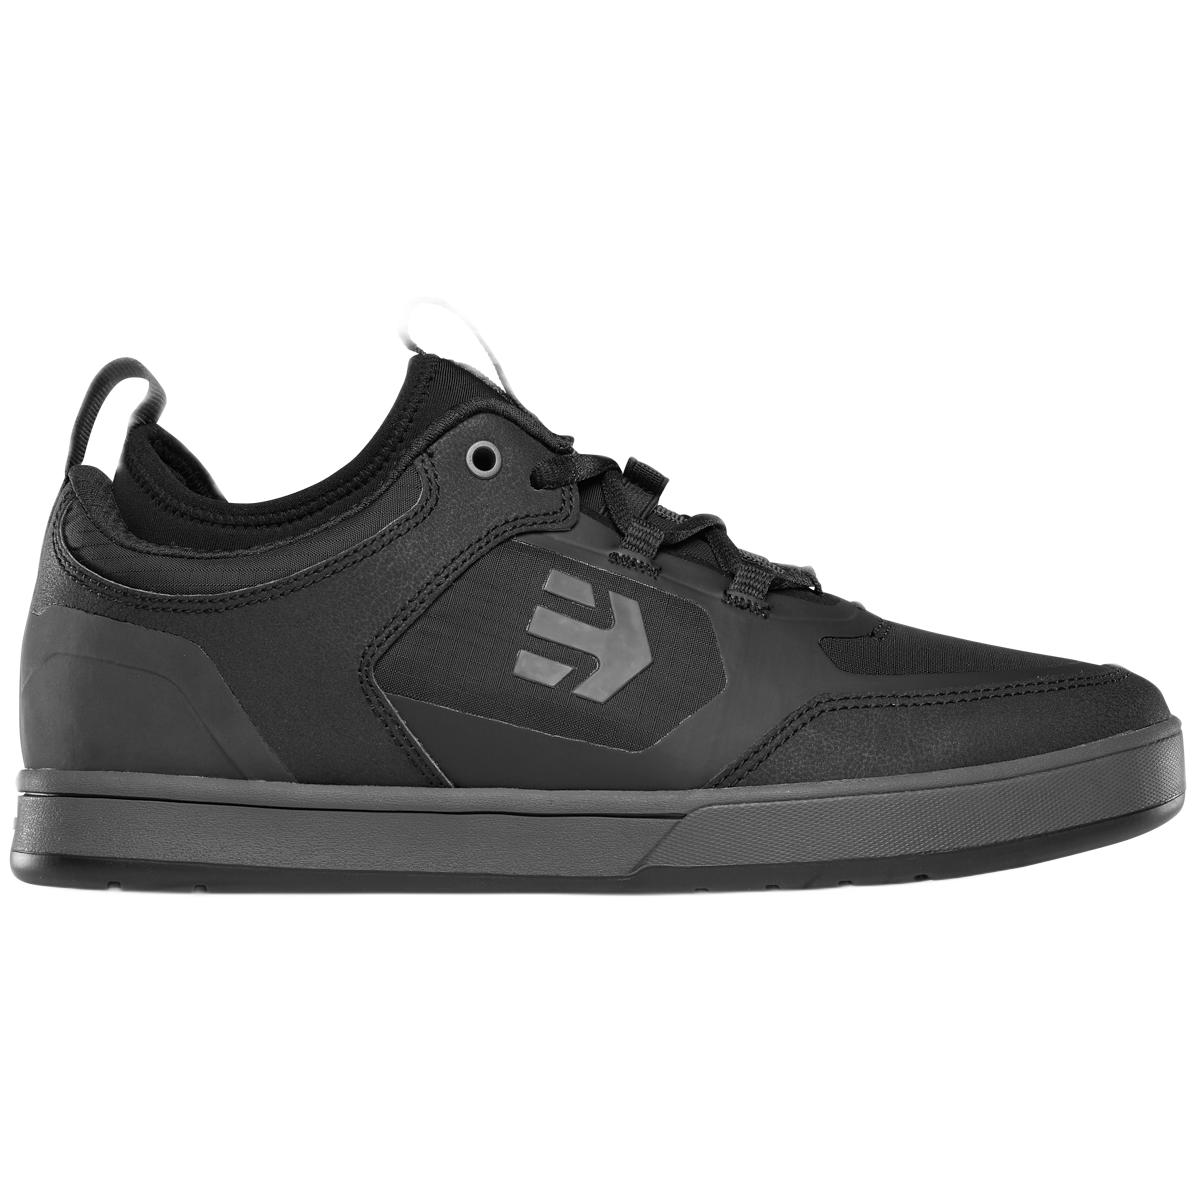 Etnies Camber Pro Wr BLACK 8 Cycling Shoes Men's